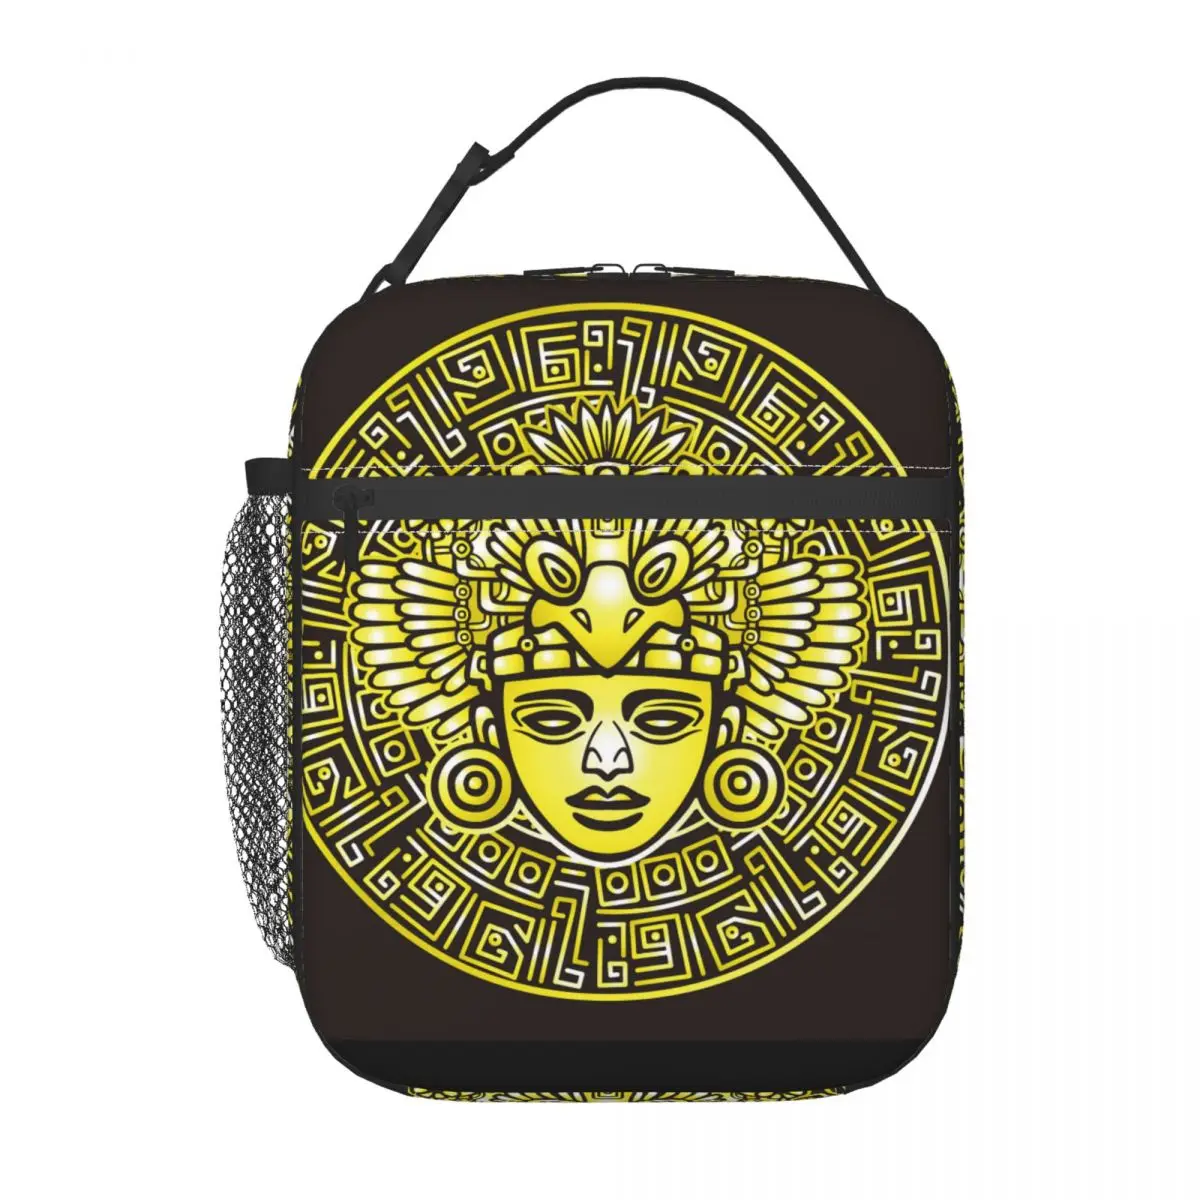 Portable Lunch Box Insulation Package Insulated Thermal Food Picnic Bags Pouch Gold Decorative Image Of An Ancient Indian Deity